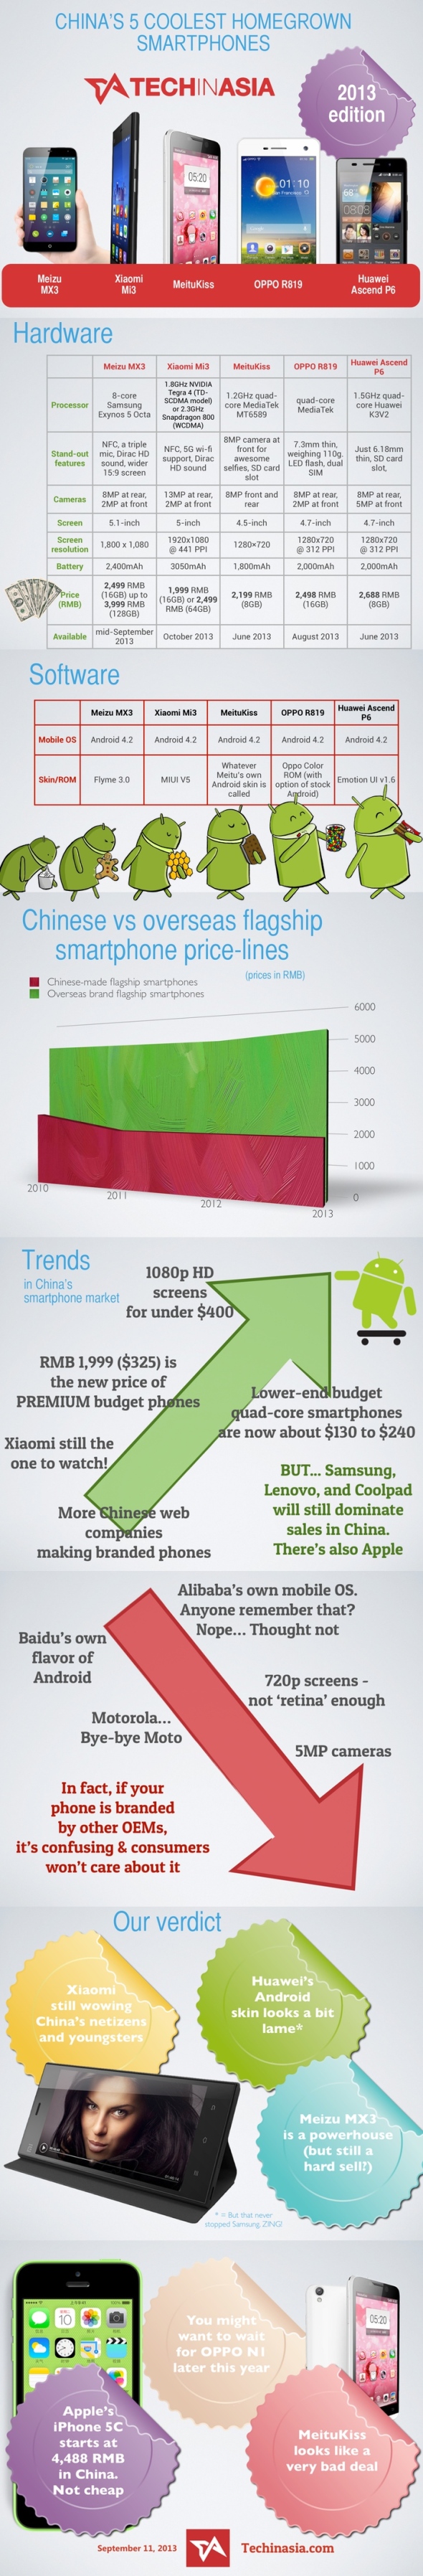 Chinas-coolest-homegrown-smartphones-2013-infographic